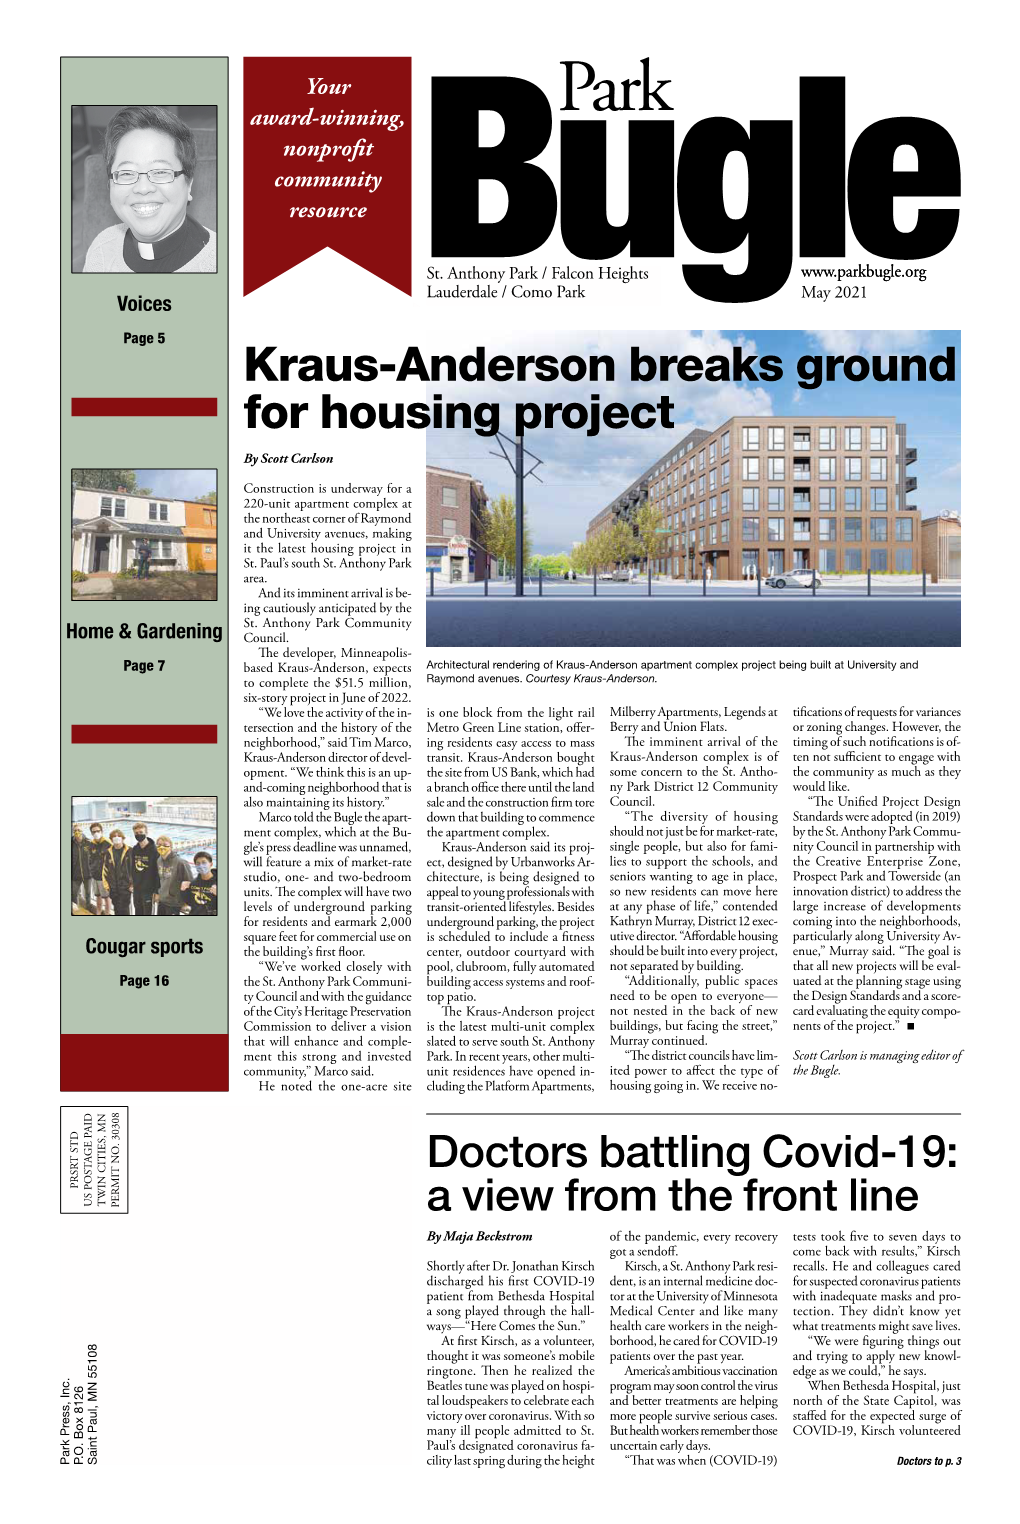 Kraus-Anderson Breaks Ground for Housing Project